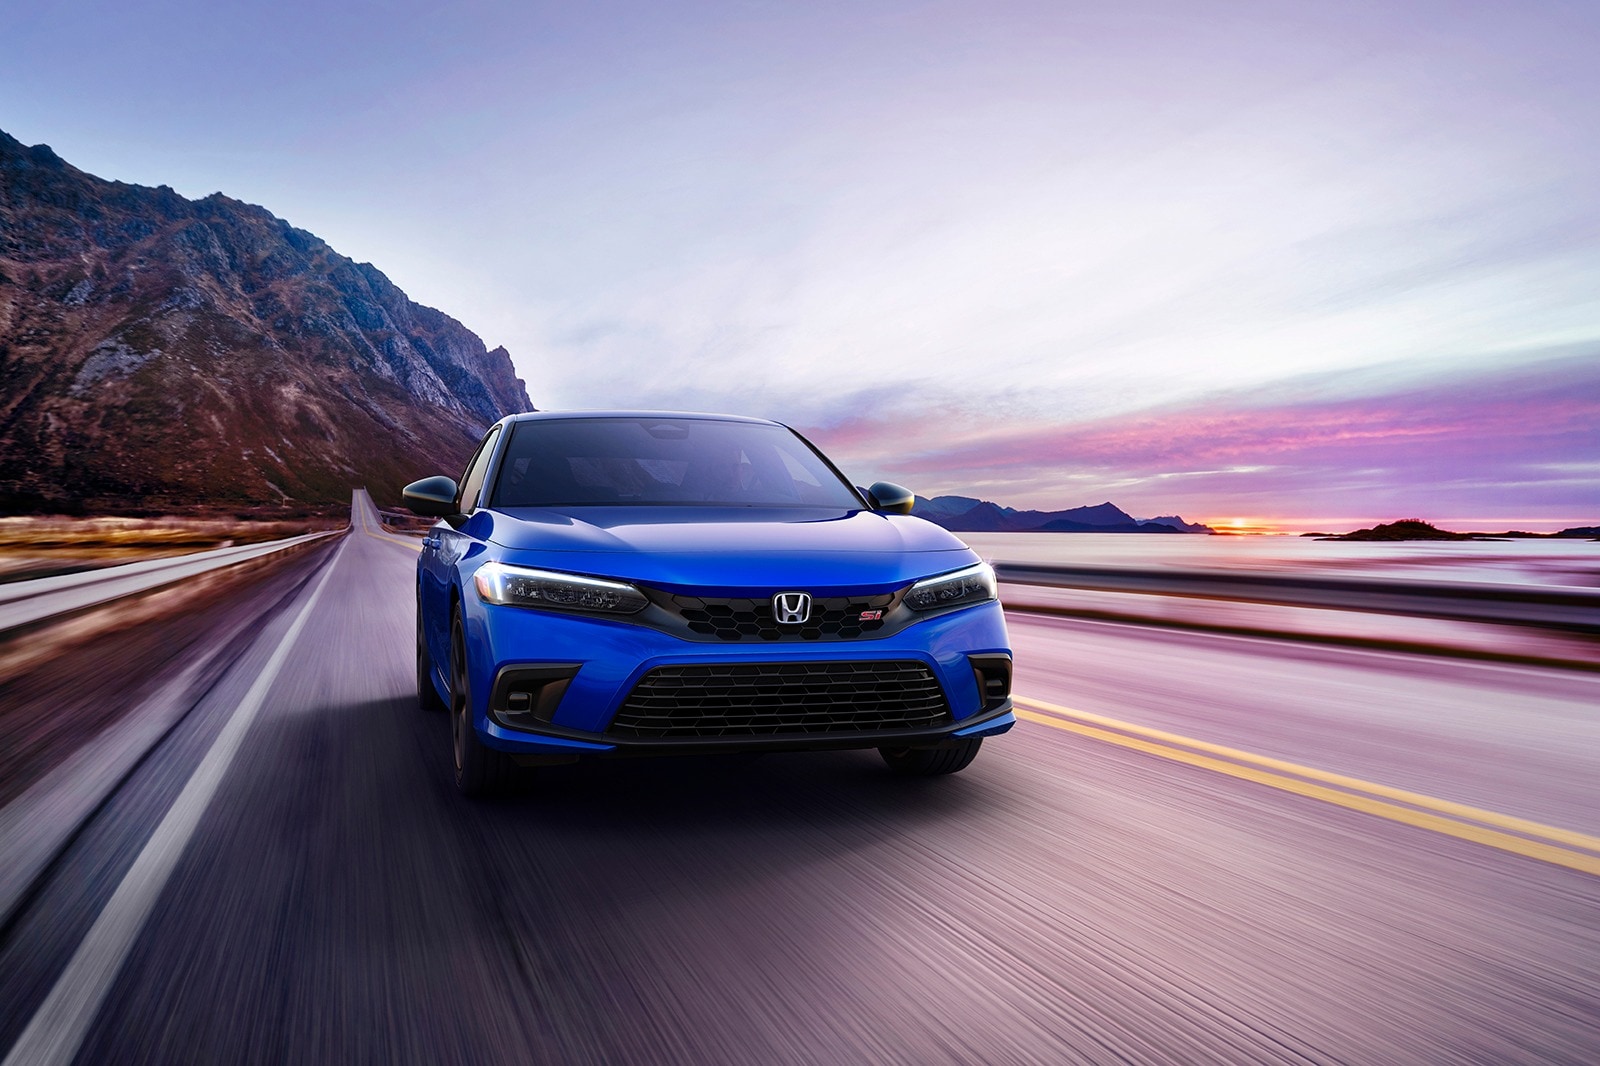 First Drive: The 2022 Honda Civic Si Is Down on Power but Still a Blast to Drive